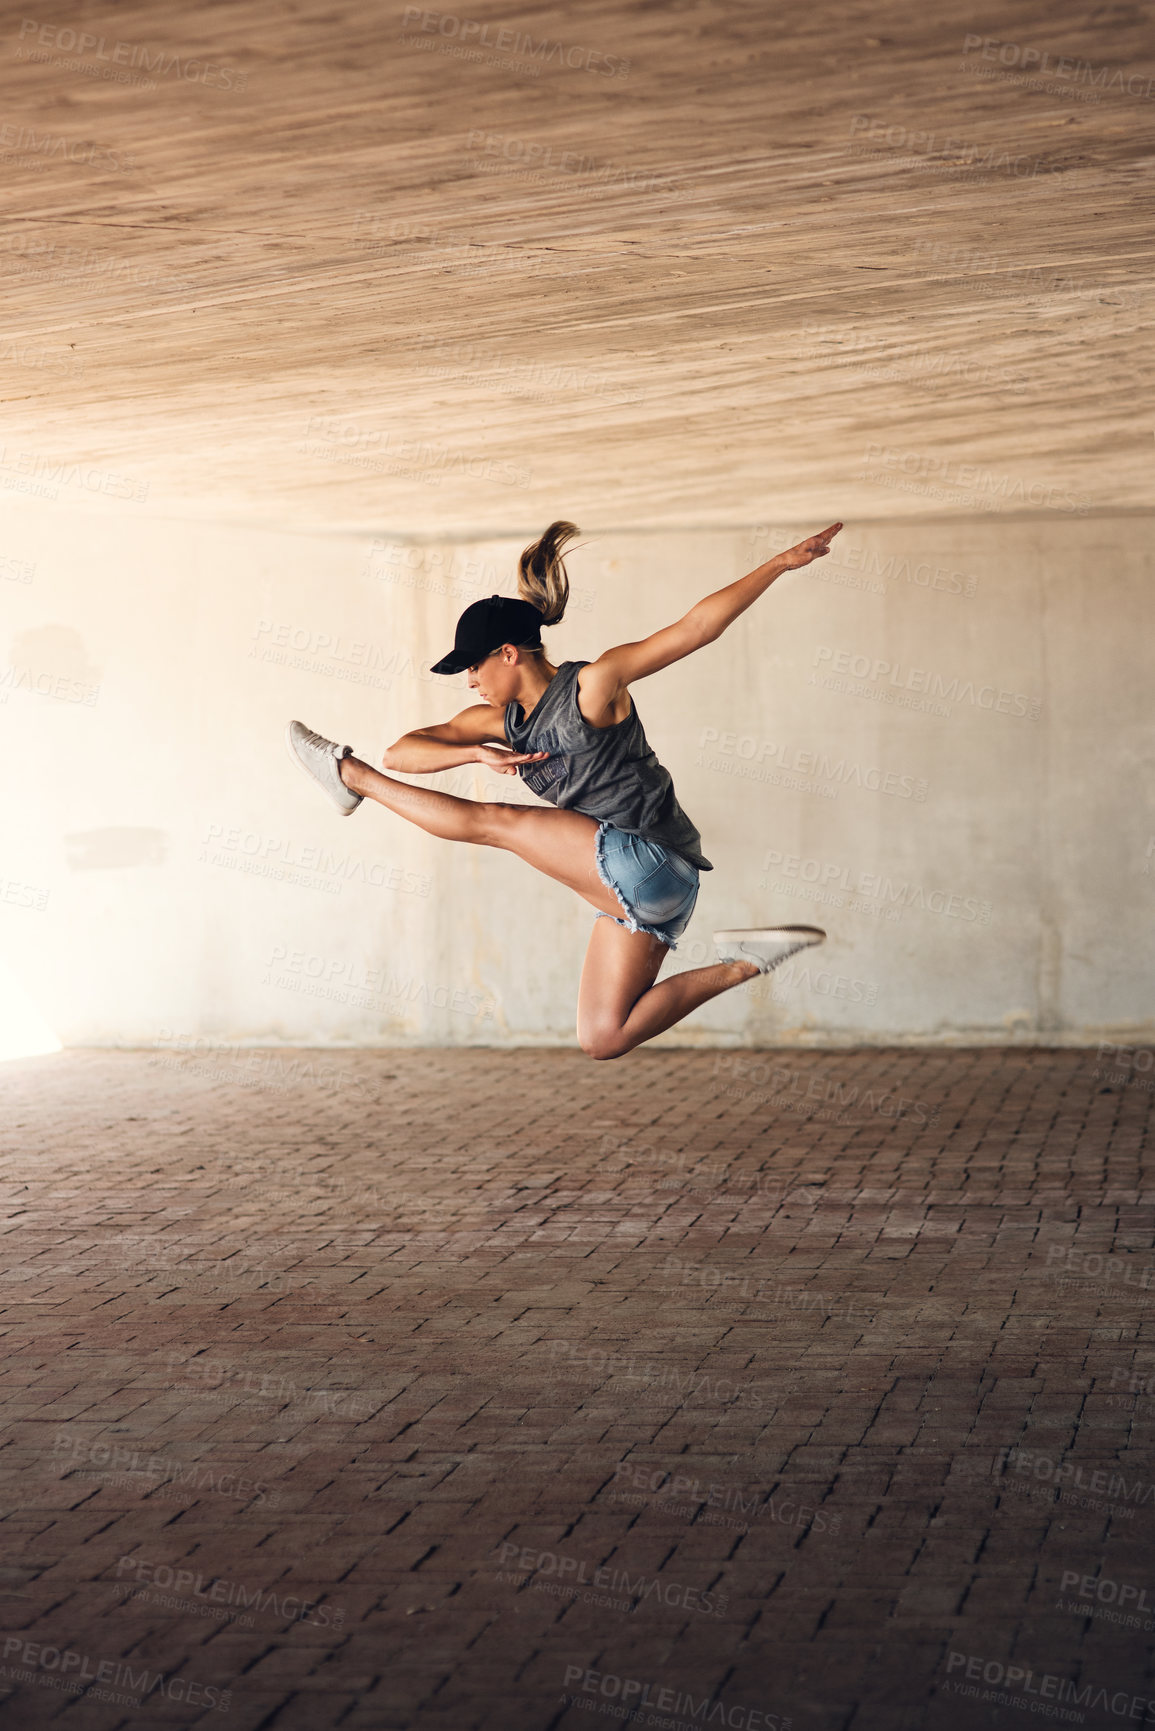 Buy stock photo Shot of an attractive young female street dancer practising out in the city